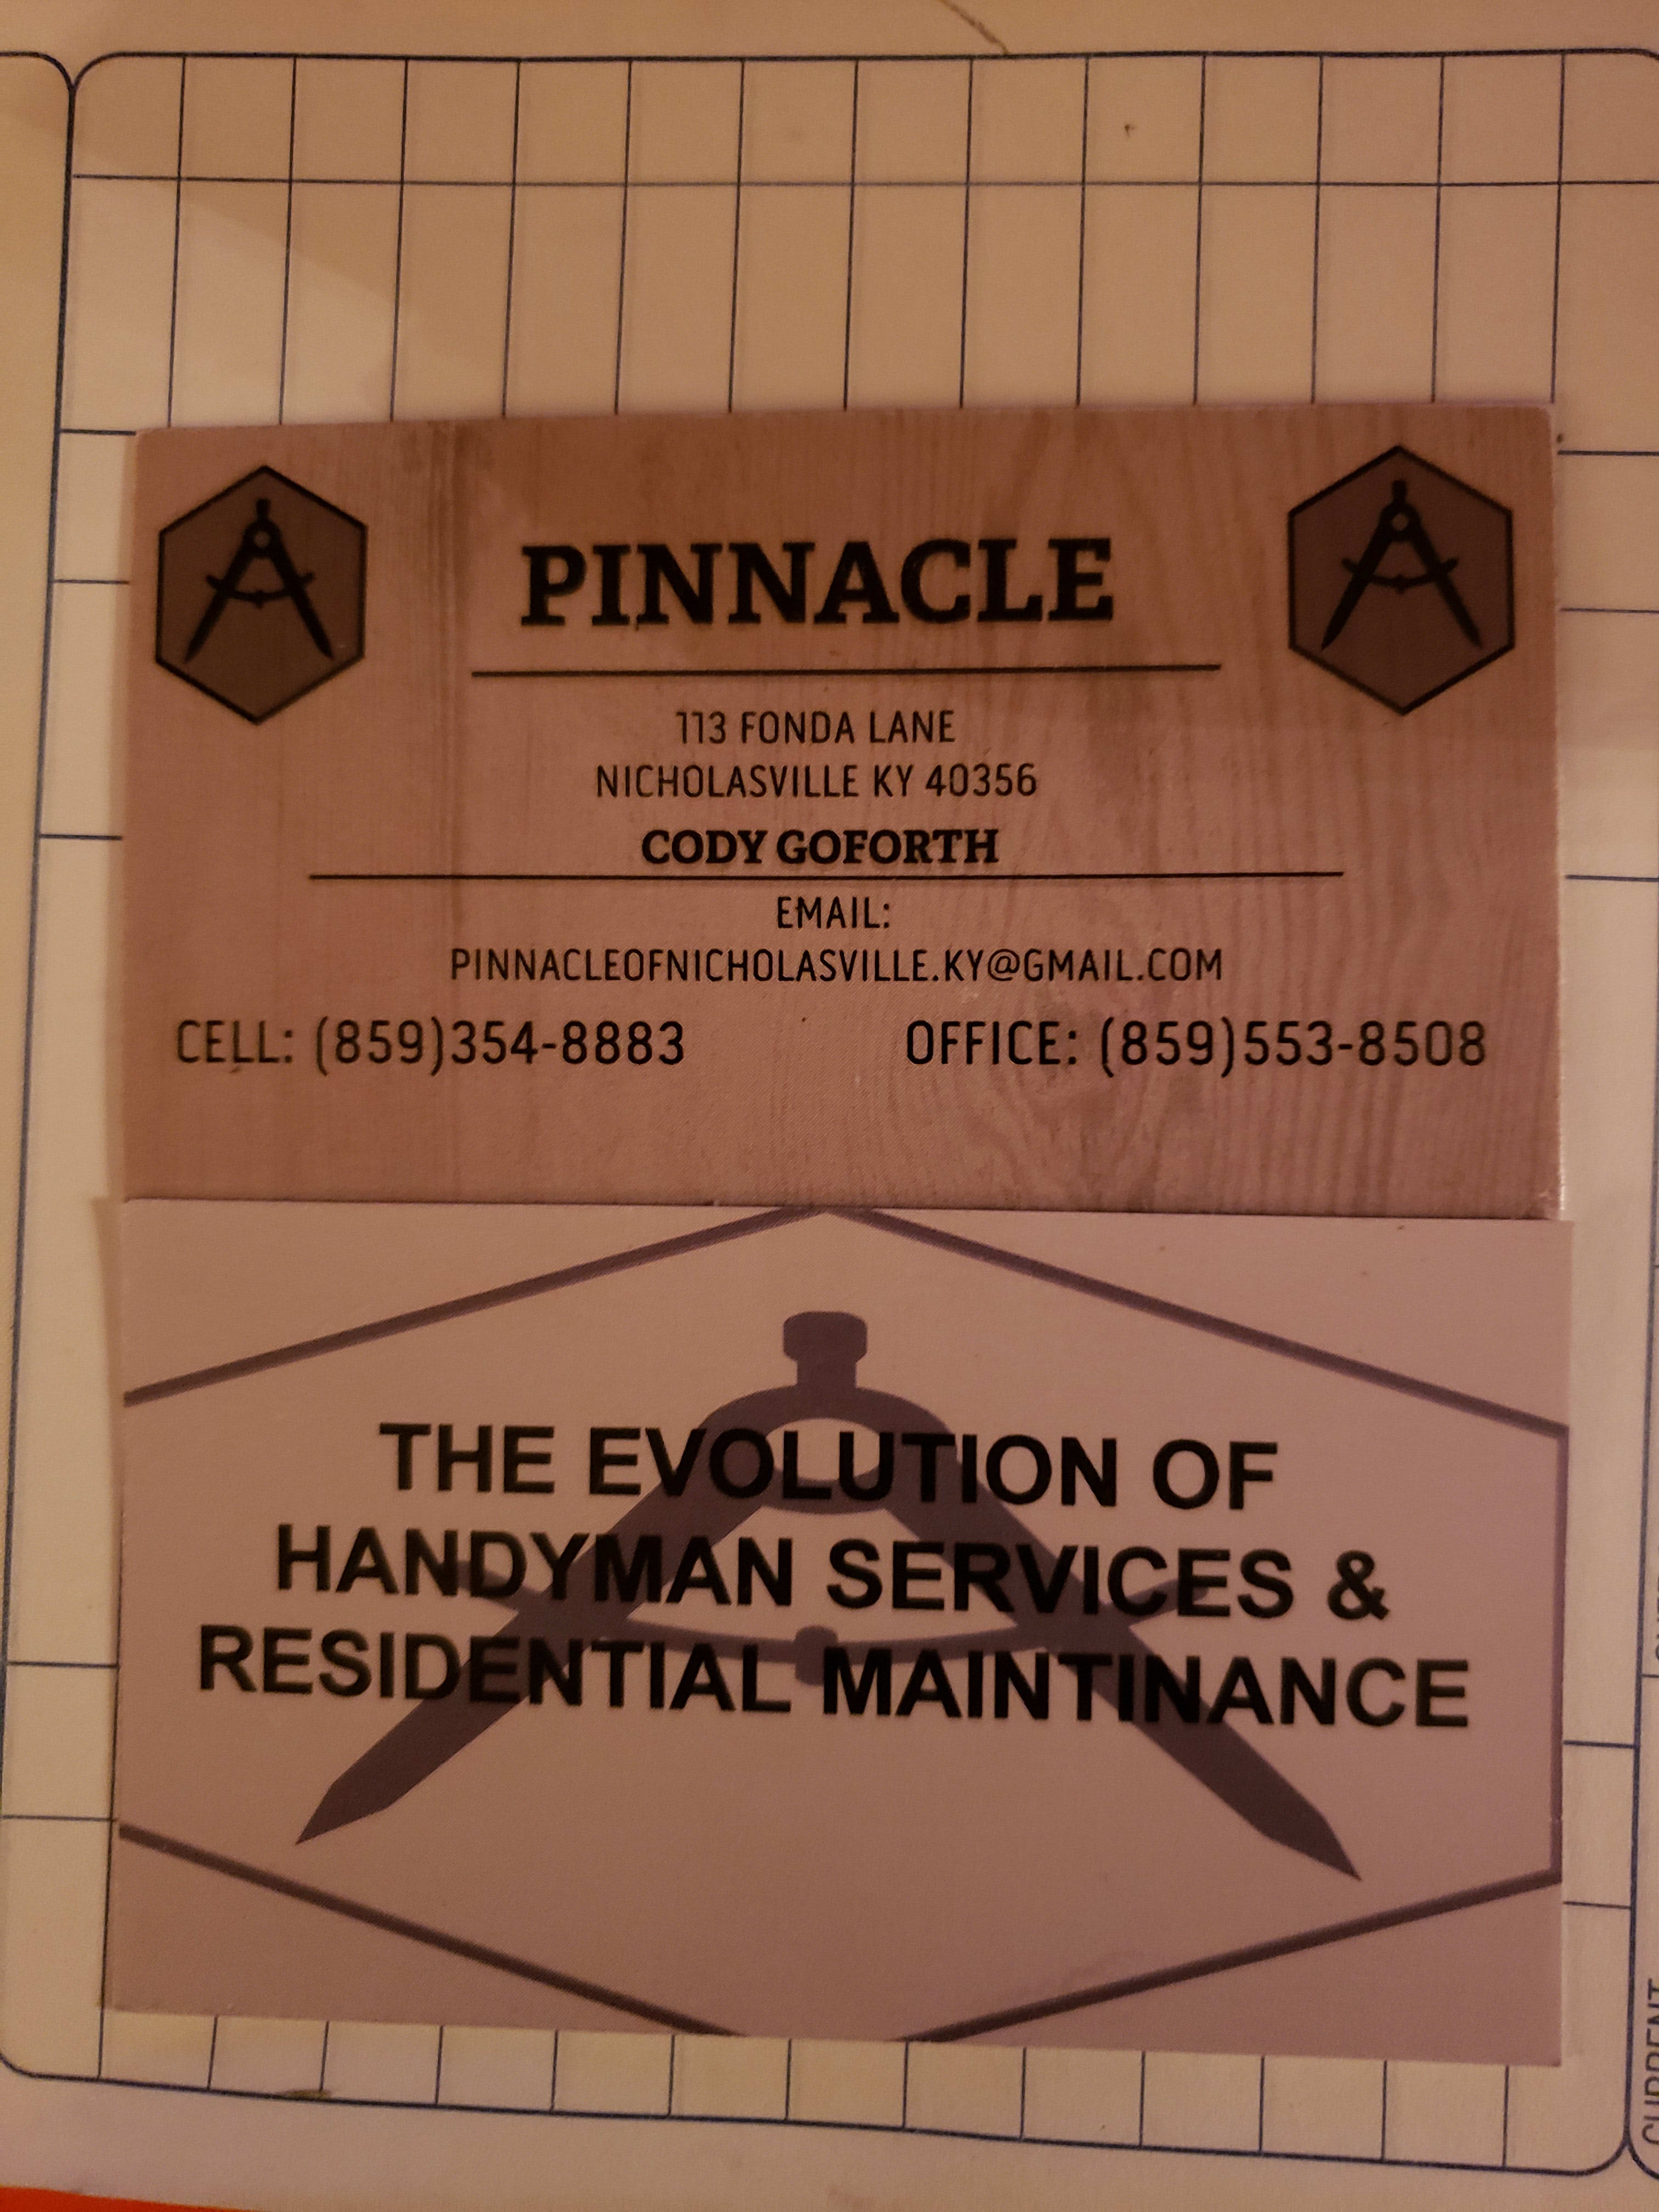 PINNACLE The Evolution of Handyman services &Residential Maintenance